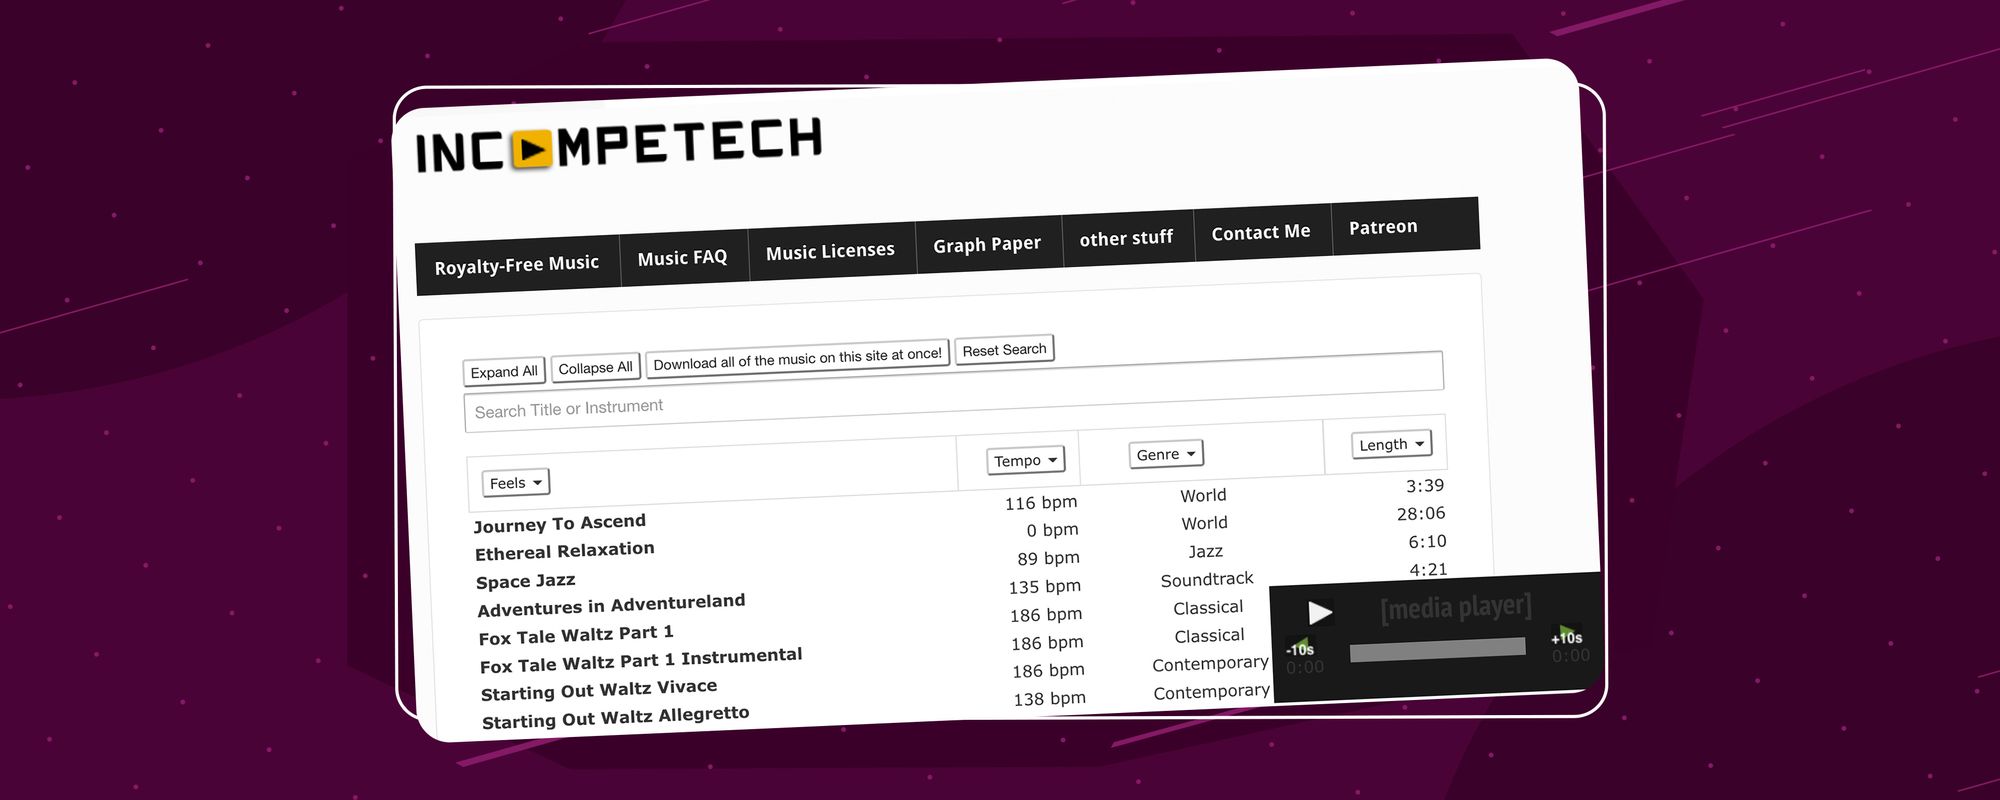 The Incompetech royalty-free music website homepage